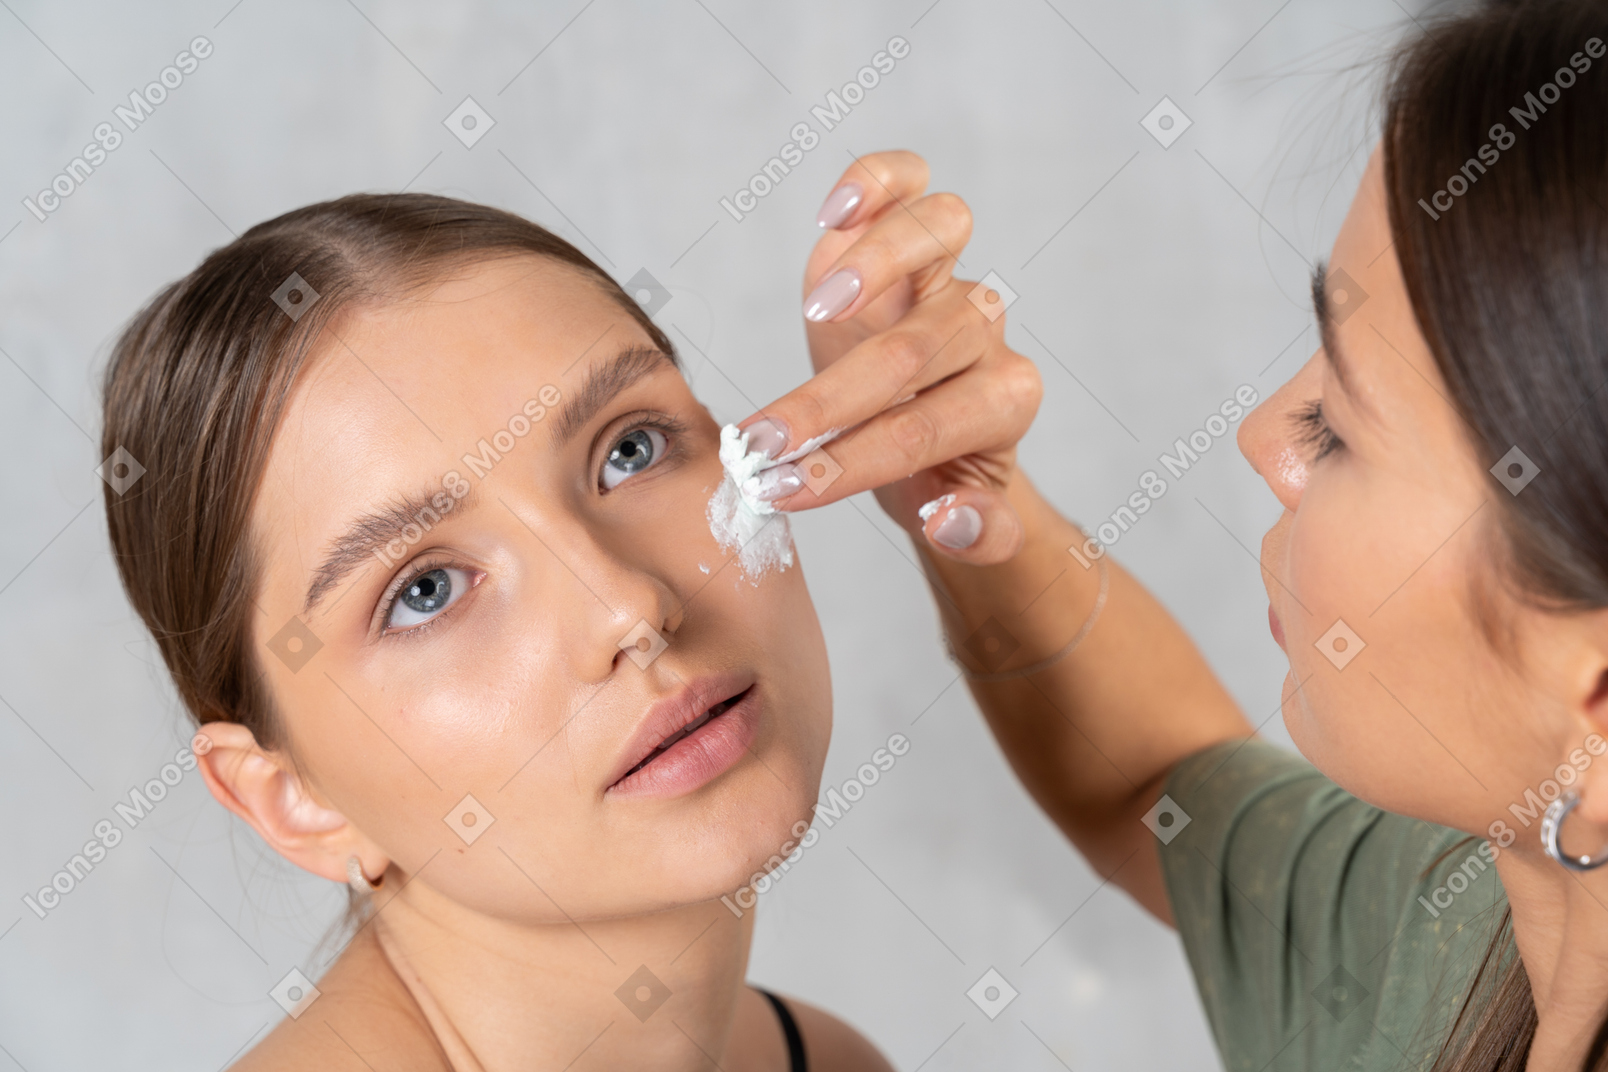 Beautician applying face cream on young woman's face